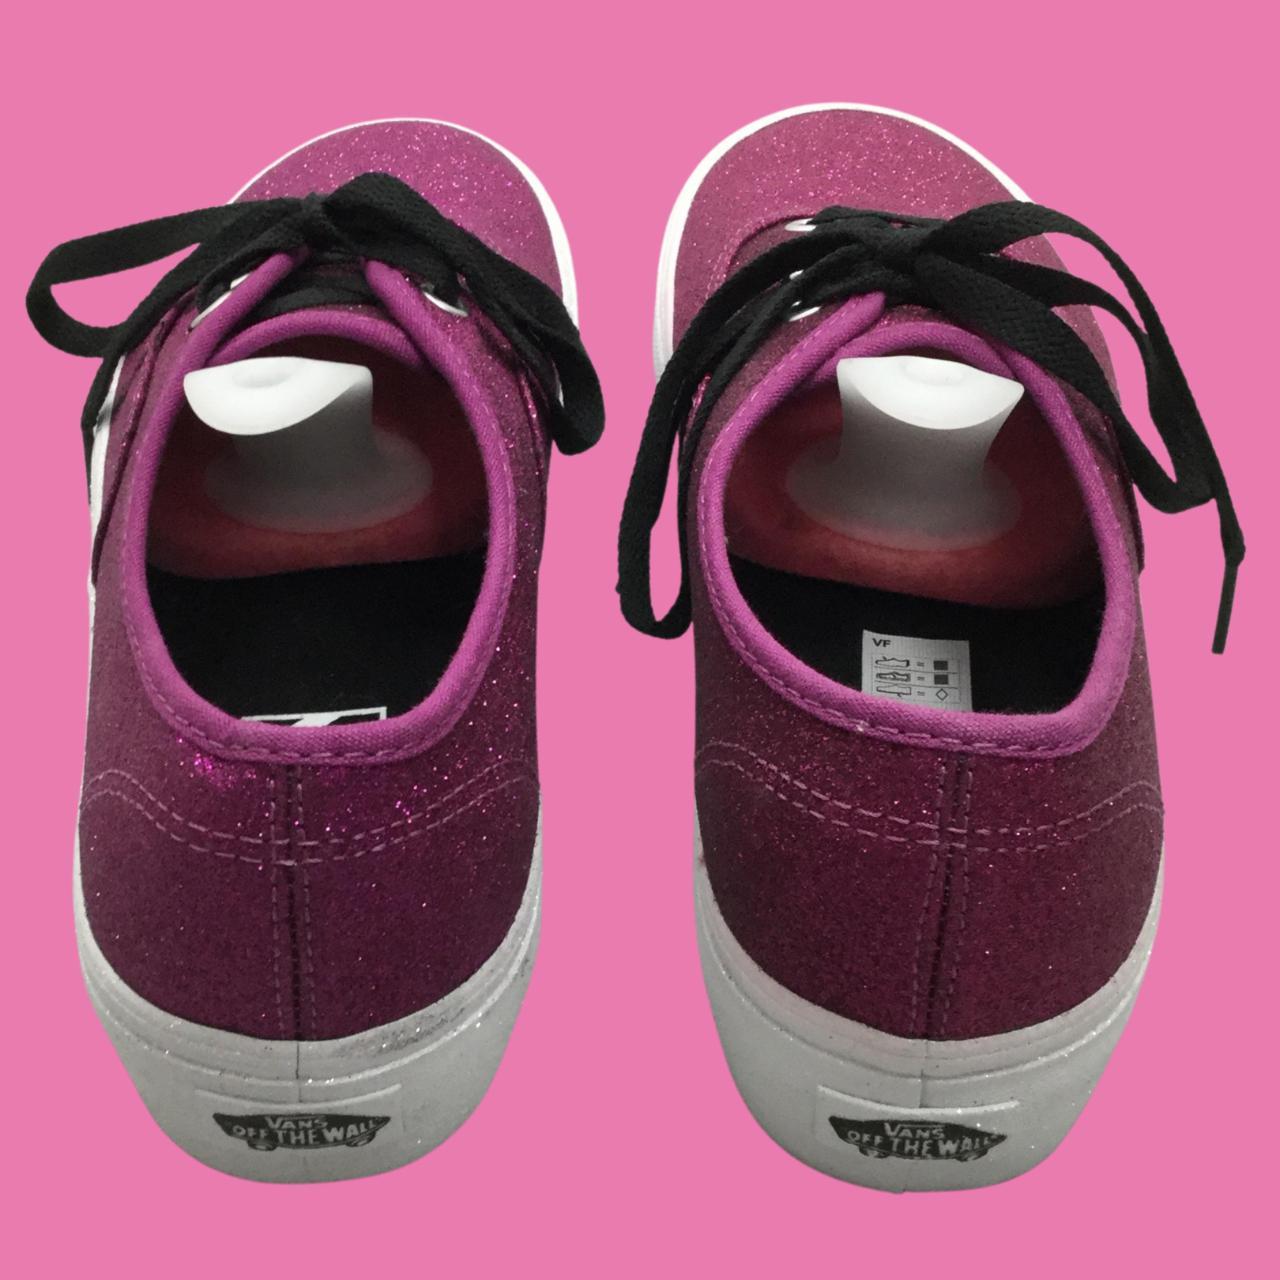 Product Image 4 - D8-08
VANS Trainers
-Glittered 
-Purple
-Lace up
-Ankle rise

Condition-